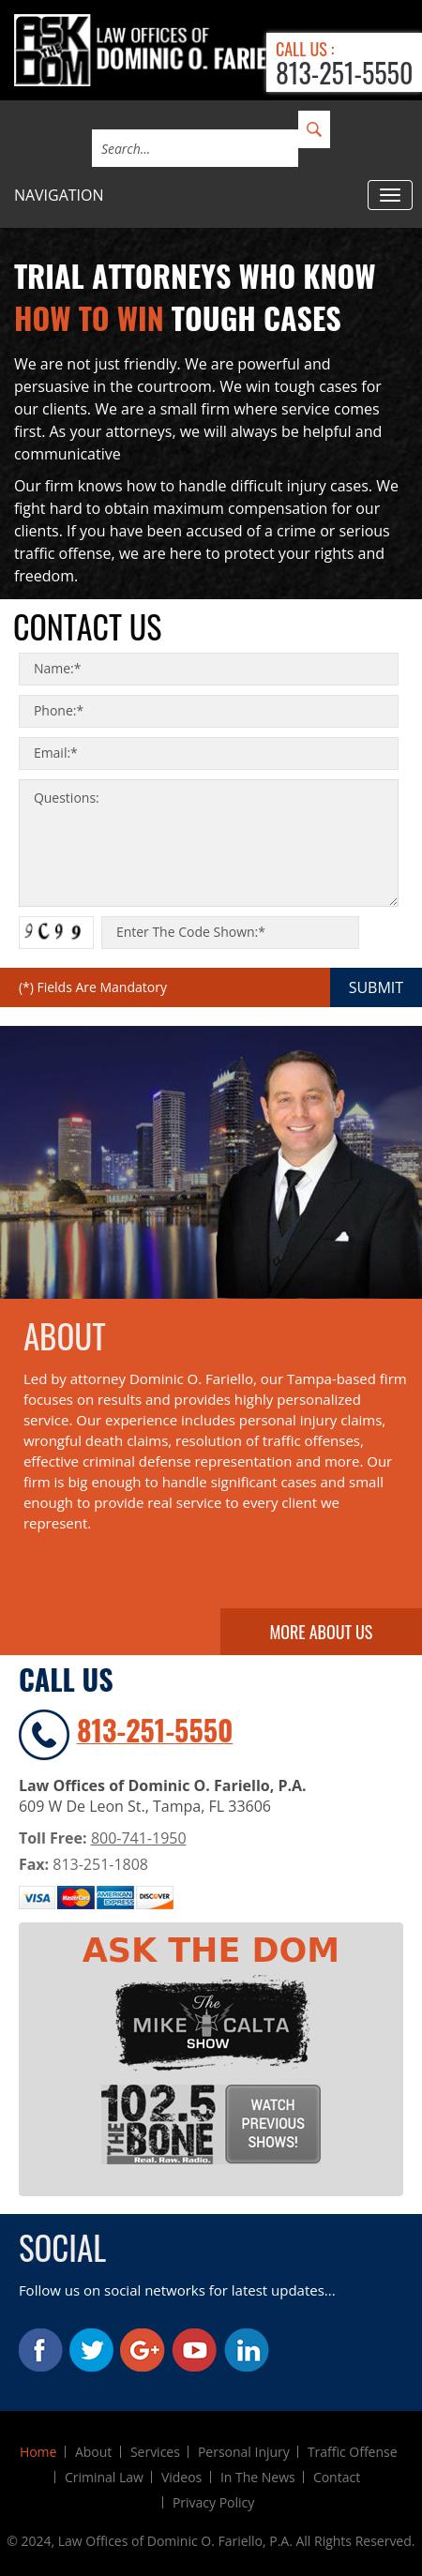 Law Offices of Dominic O. Fariello, P.A. - New Port Richey FL Lawyers